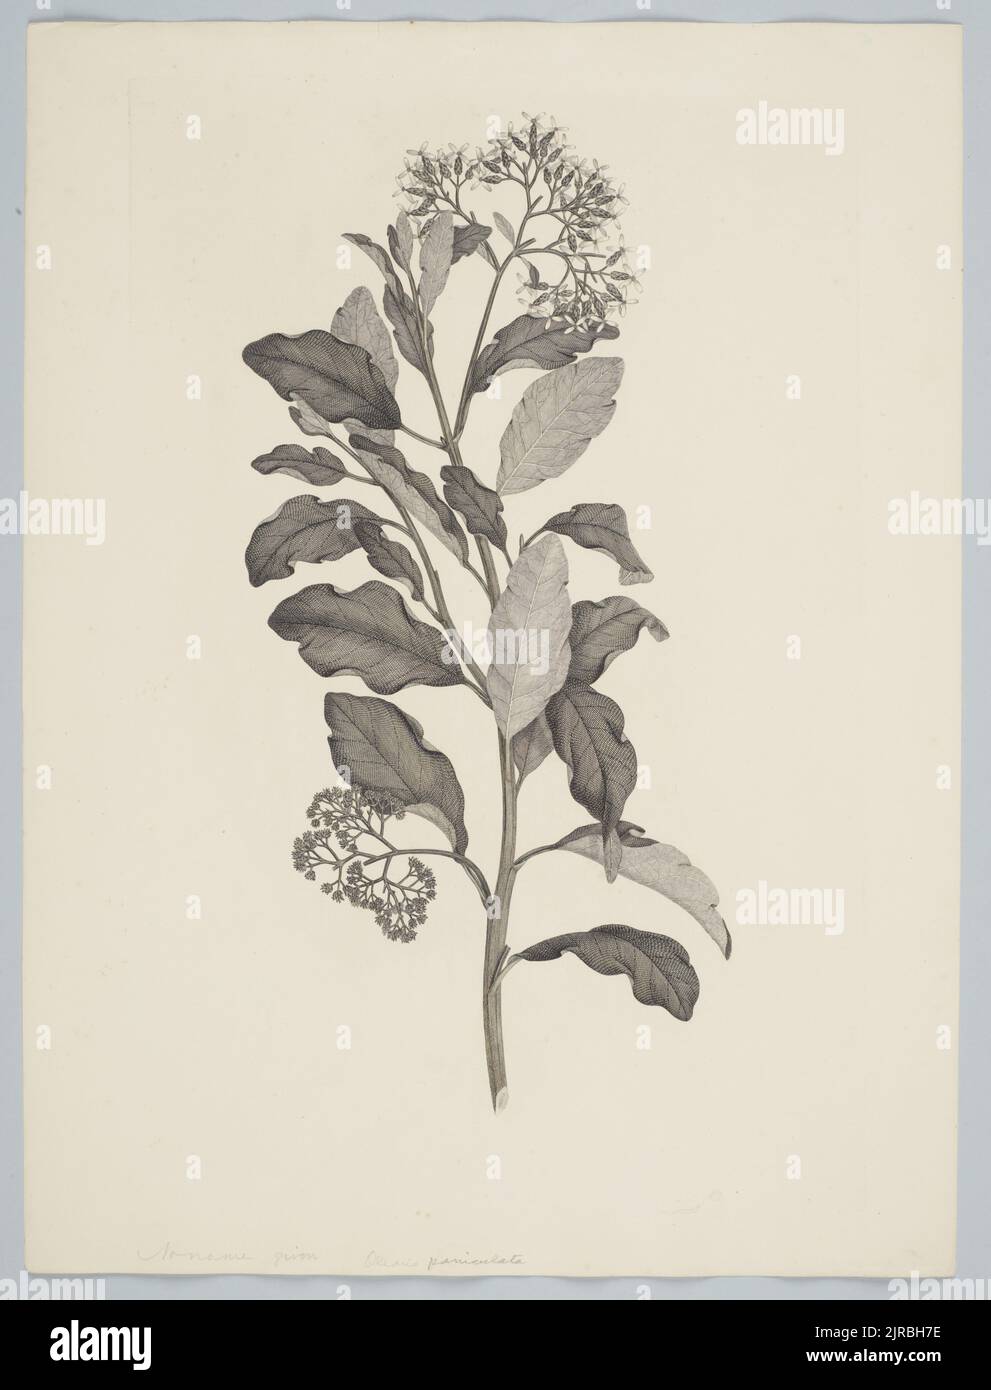 Olearia paniculata (Forster & G. Forster) Druce, 1895, United Kingdom, by Sydney Parkinson. Gift of the British Museum, 1895. Stock Photo